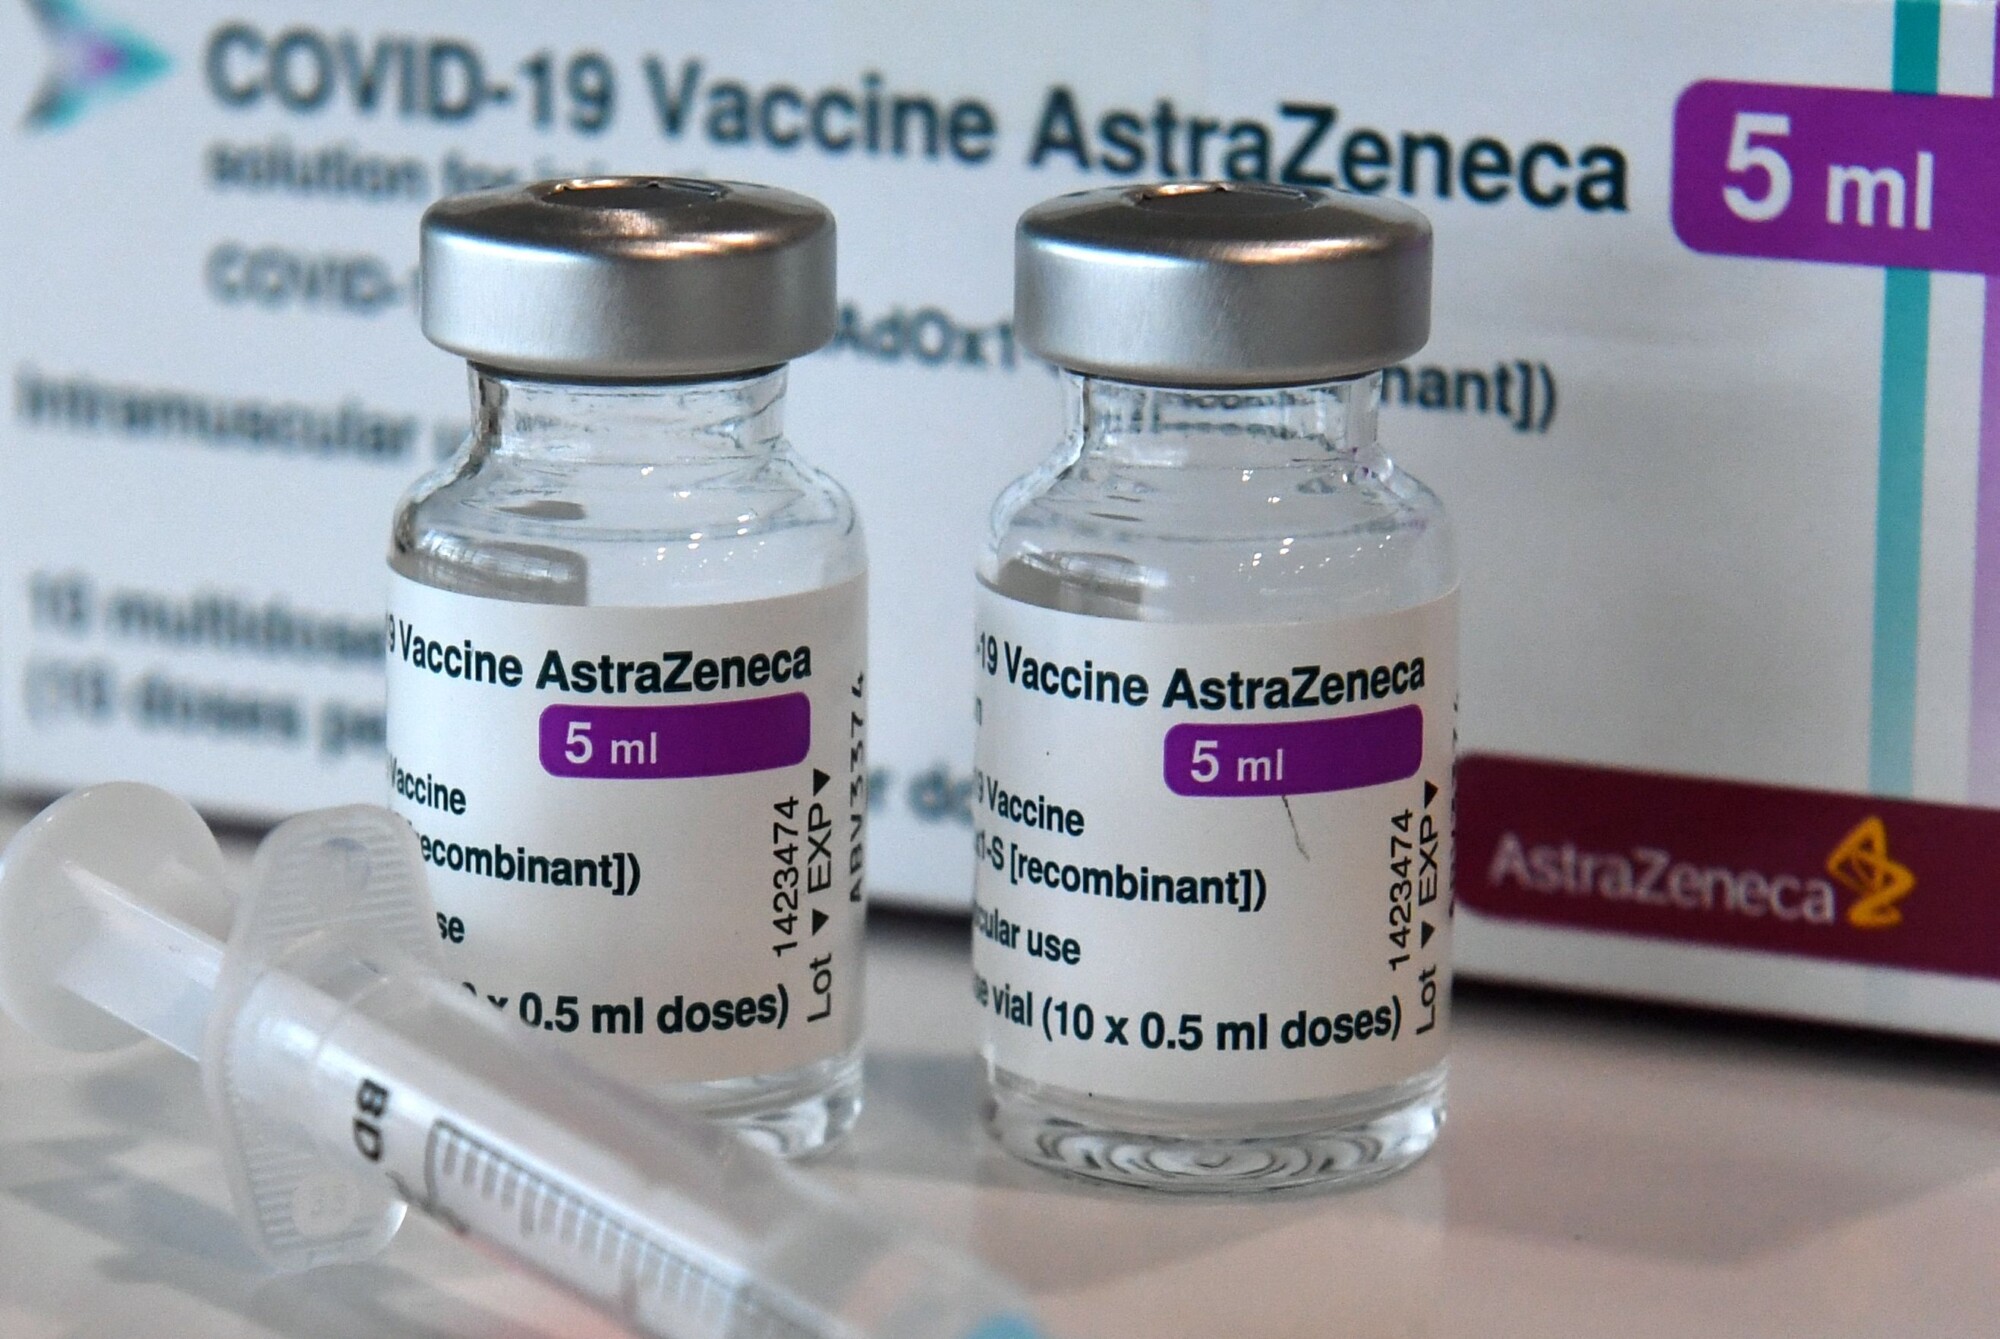 Germany Reports More Blood Clot Cases Associated With AstraZeneca Vaccine